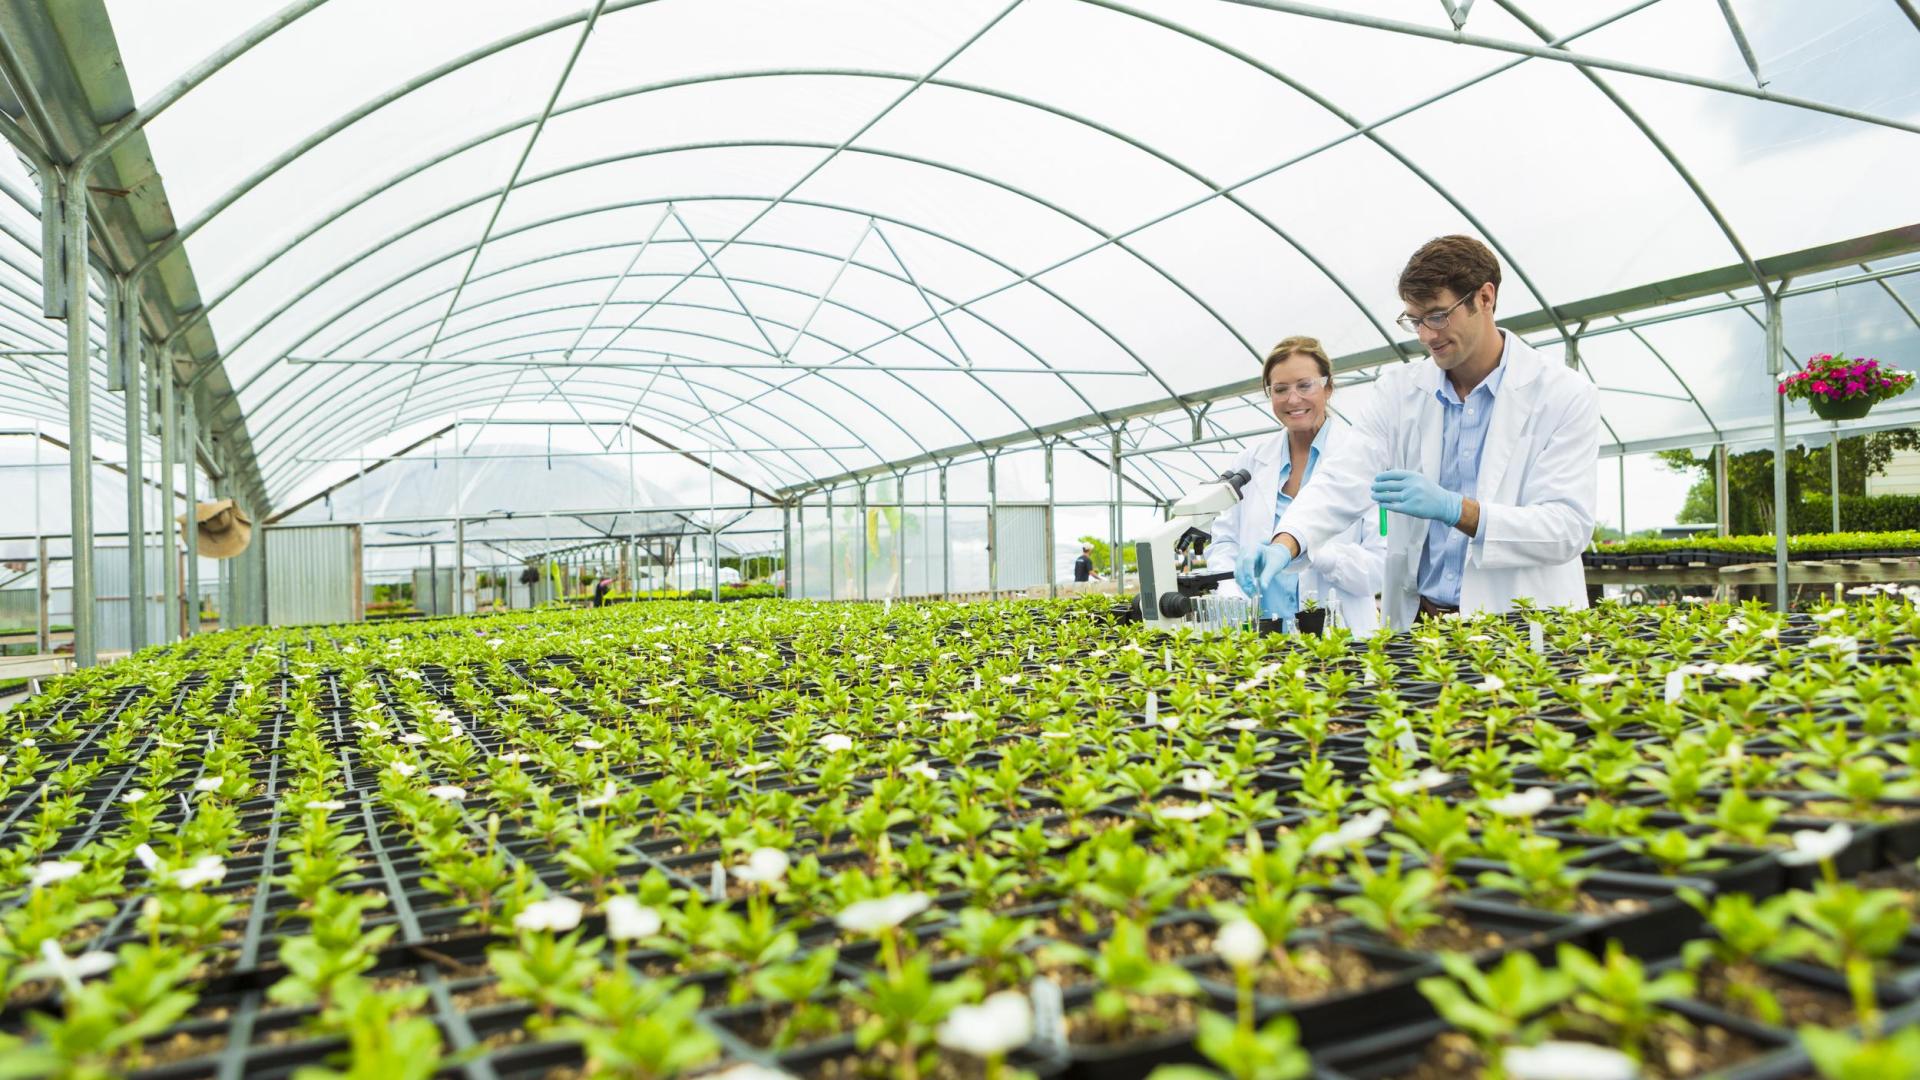 stock photo of two people in greenhouse